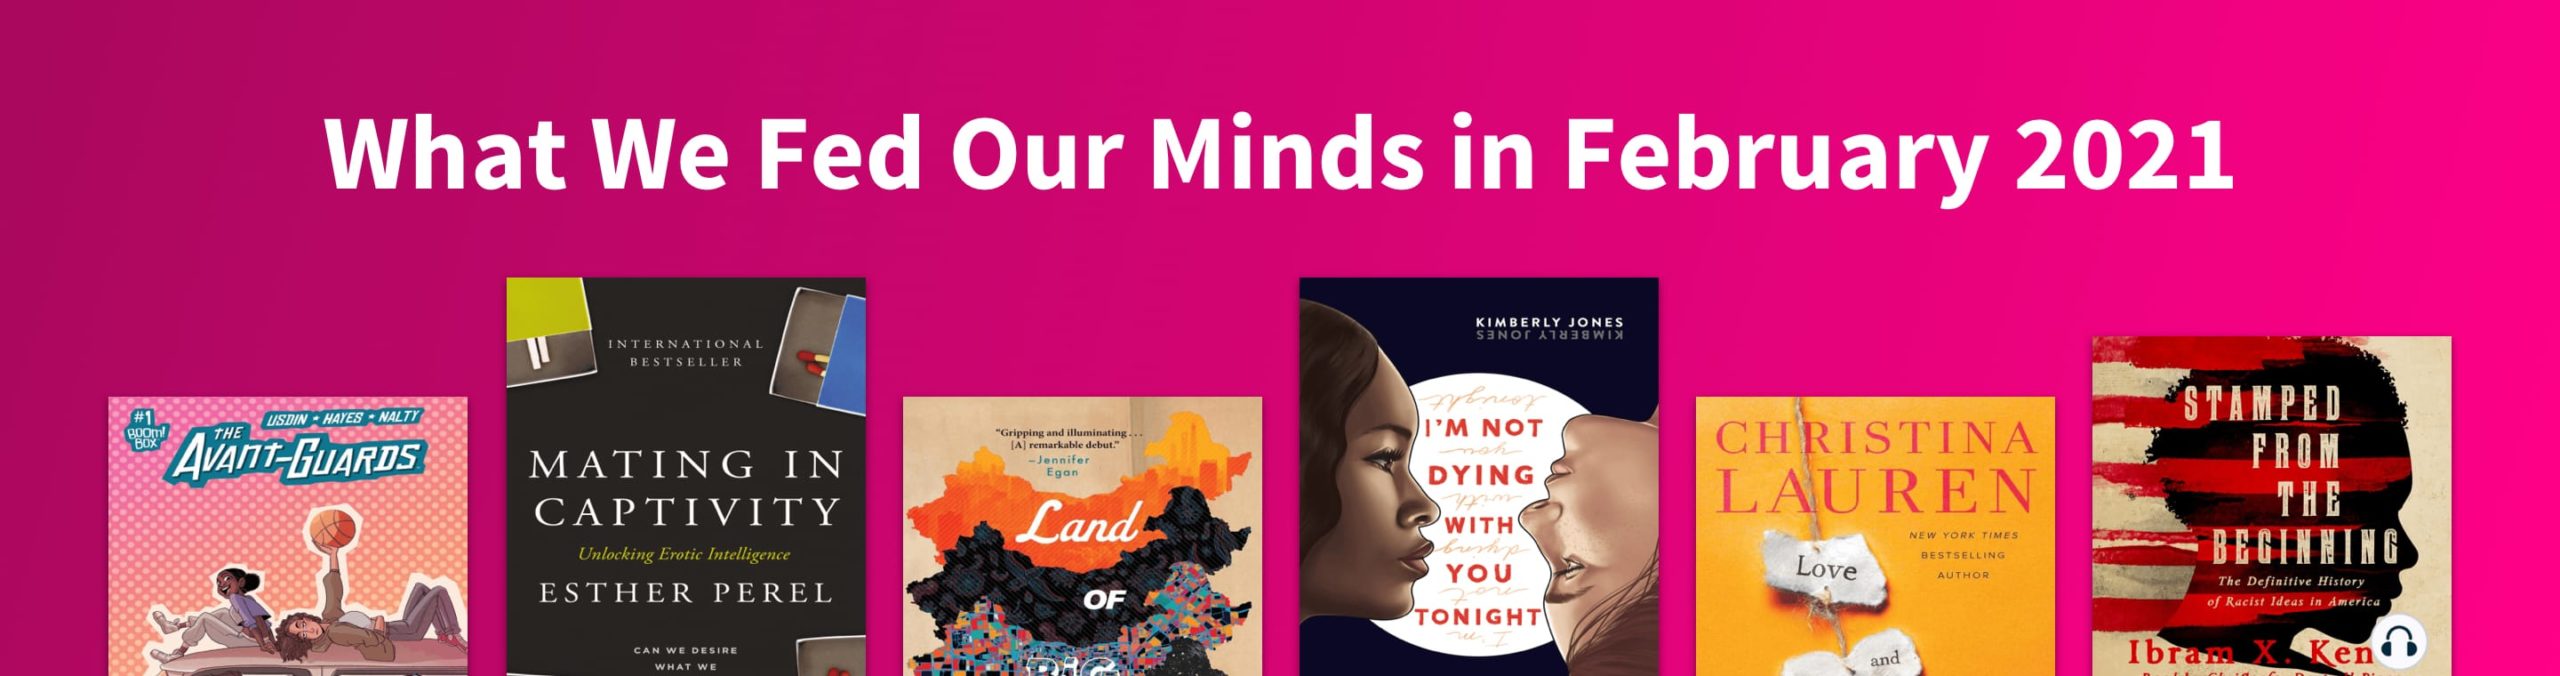 What we fed our minds this February